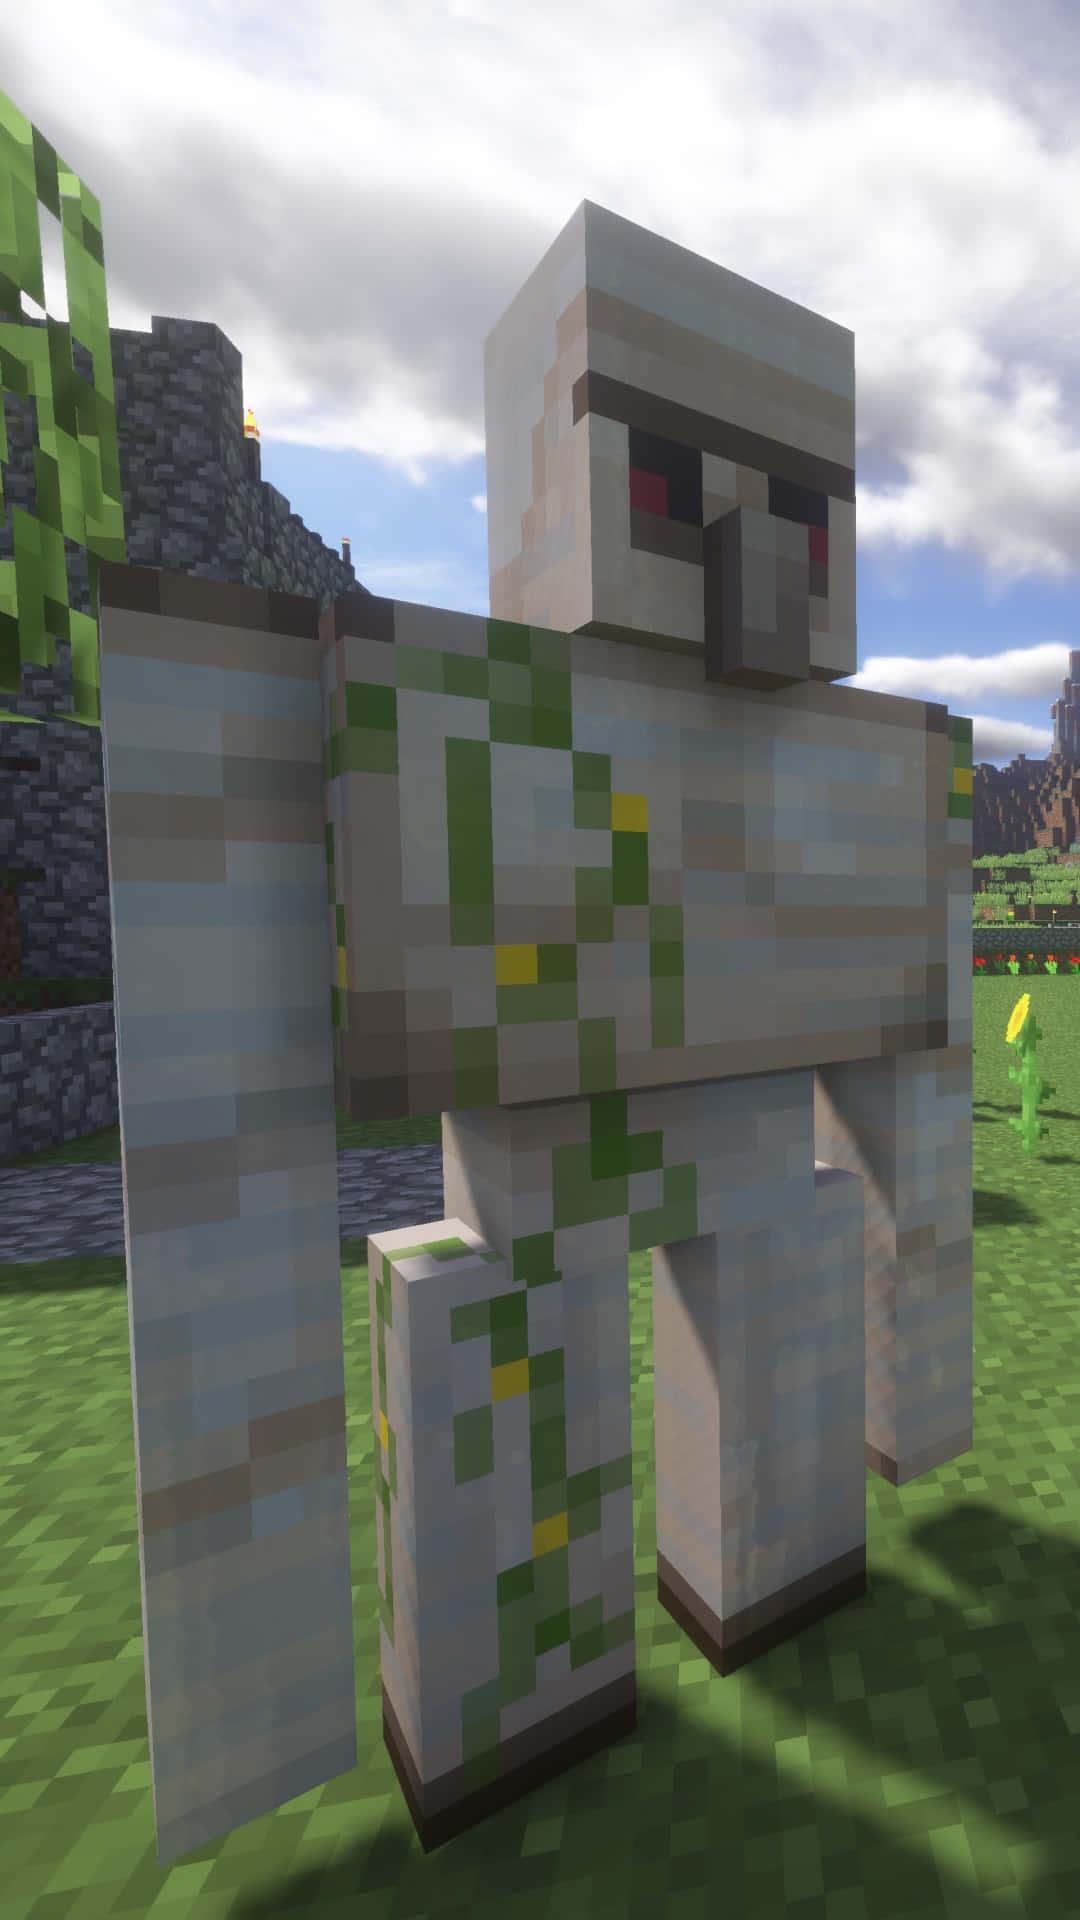 Majestic Iron Golem amidst a serene natural landscape in the world of Minecraft Wallpaper